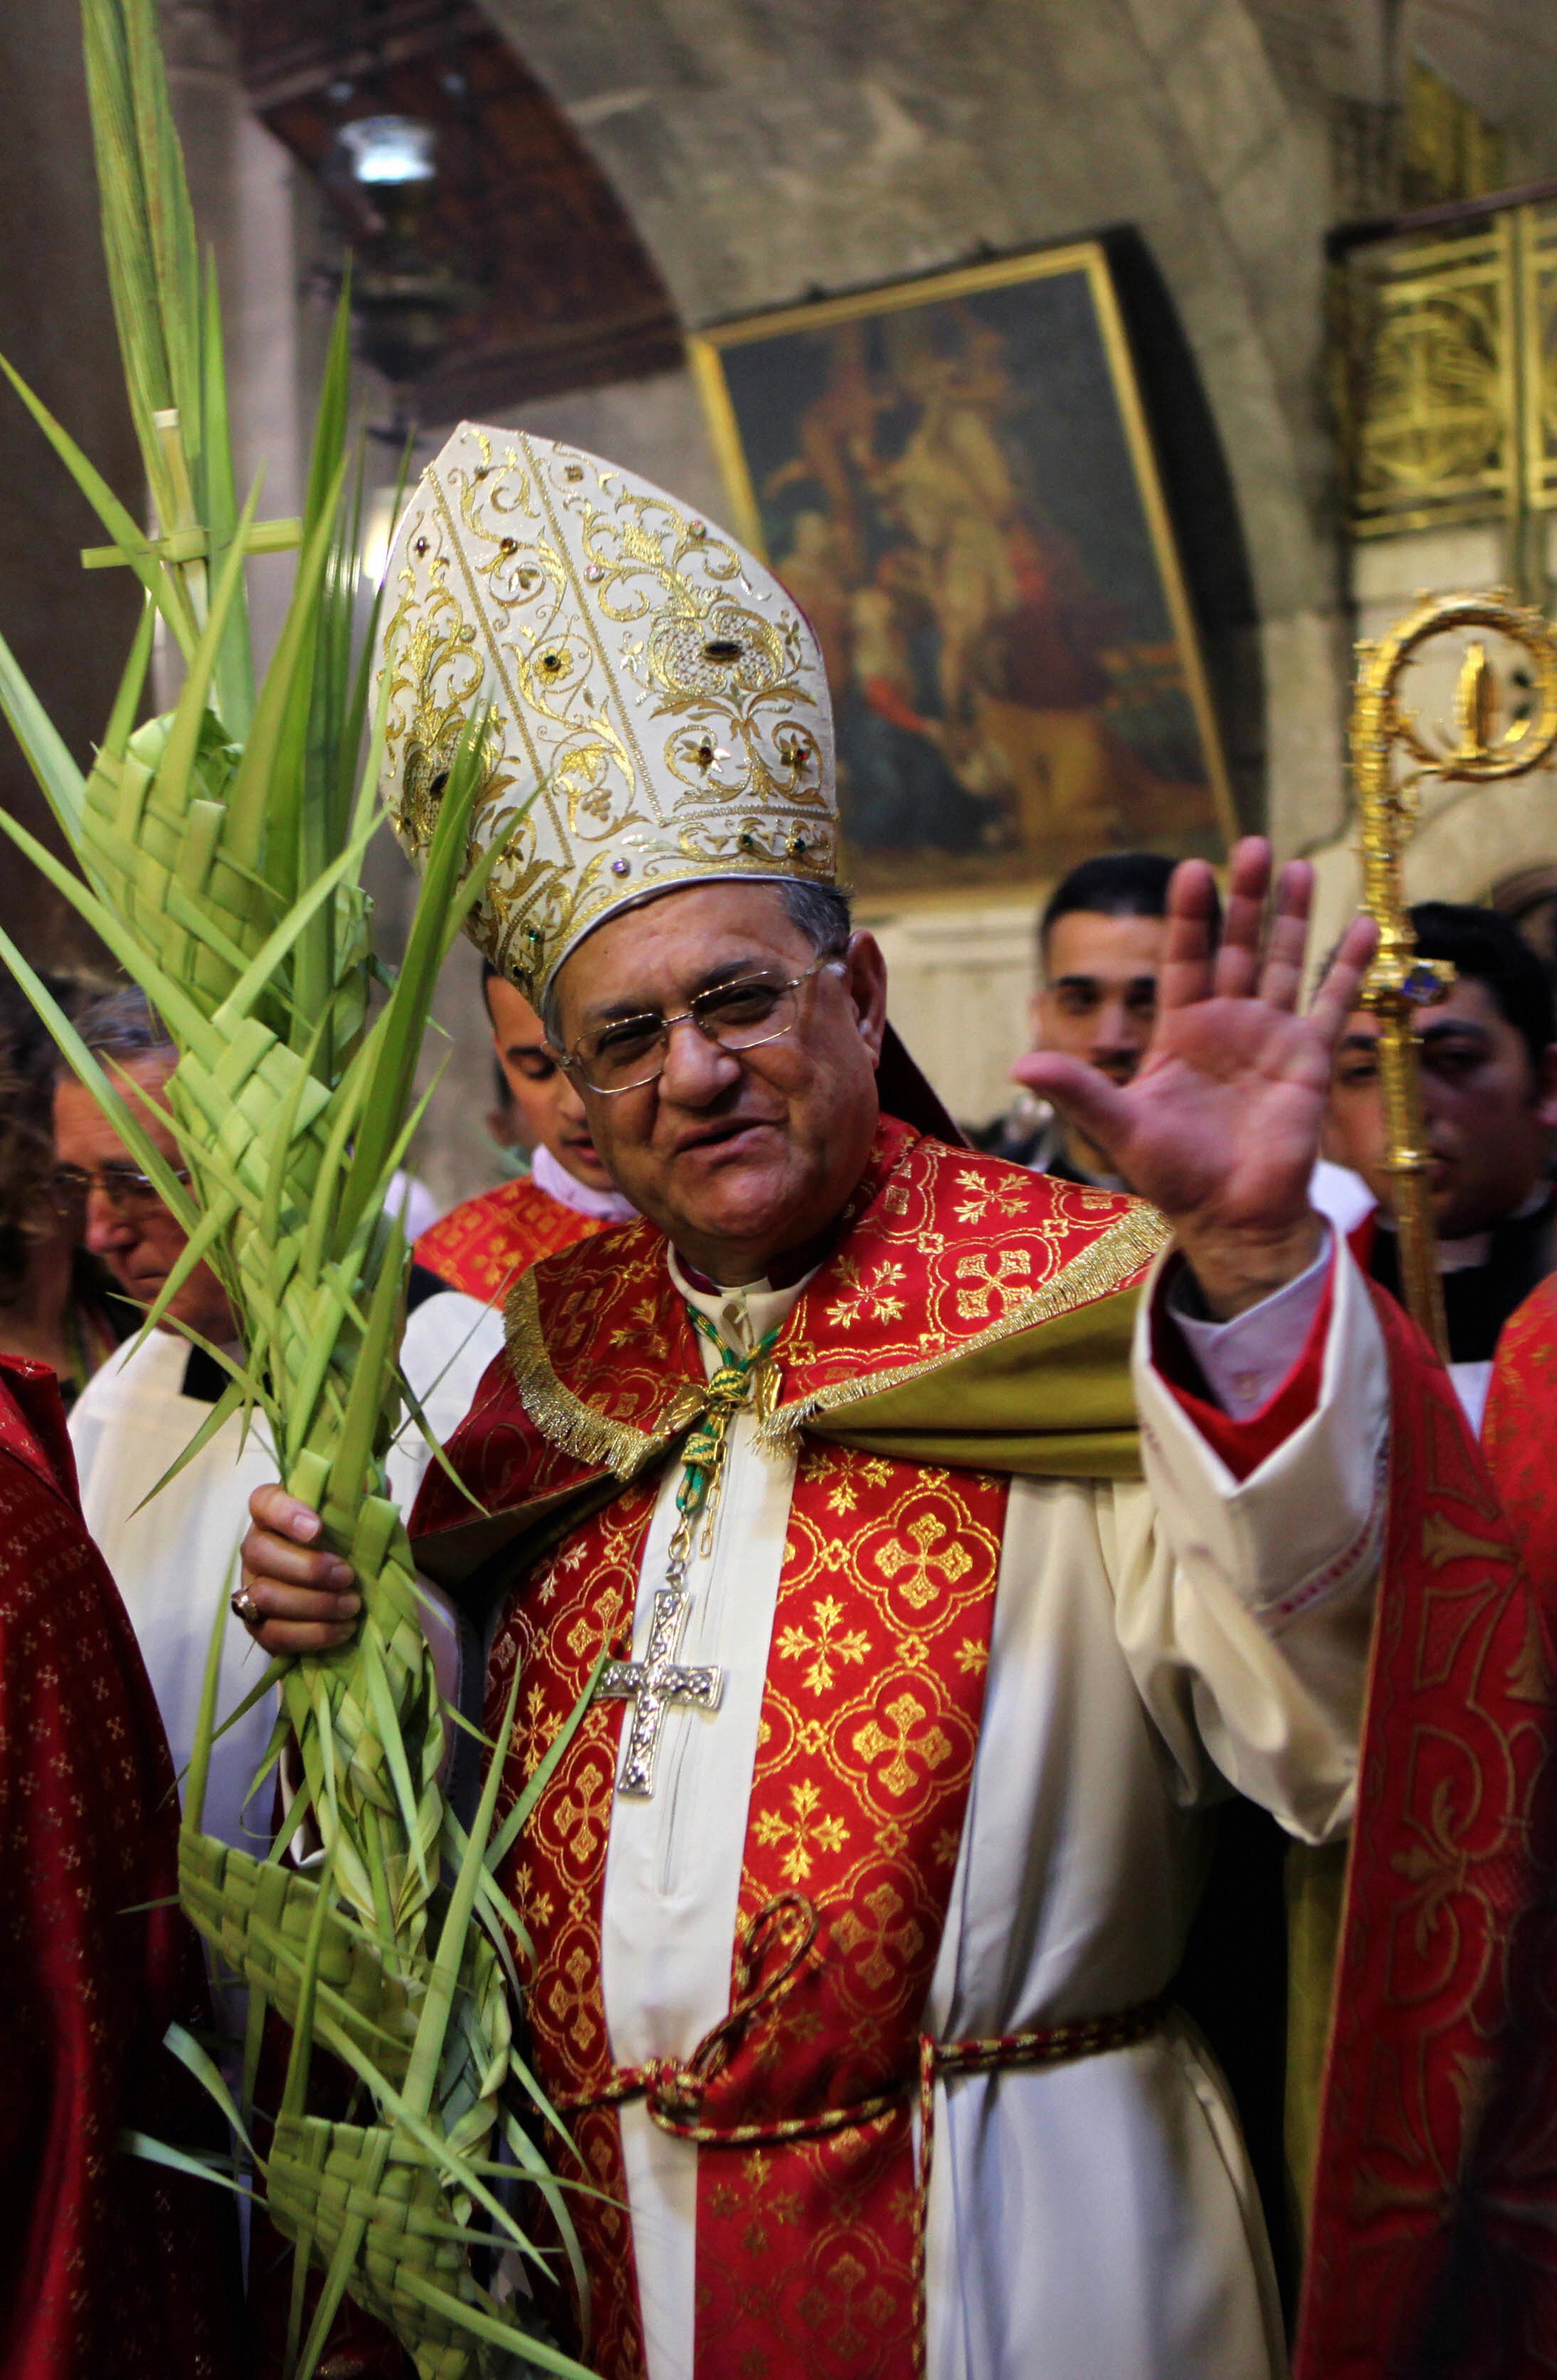 GALI TIBBON/AFP/Getty Images. The head of the Roman Catholic Church in the Holy Land, the Latin Patriarch of Jerusalem Fuad Twal, leads the Palm Sunday procession at the Church of the Holy Sepulchre in Jerusalem's Old City on April 05, 2009. The ceremony is a landmark in the Roman Catholic calendar, marking the triumphant return of Christ to Jerusalem the week before his death, when a cheering crowd greeted him waving palm leaves. Palm Sunday marks the start of the most solemn week in the Christian calendar.